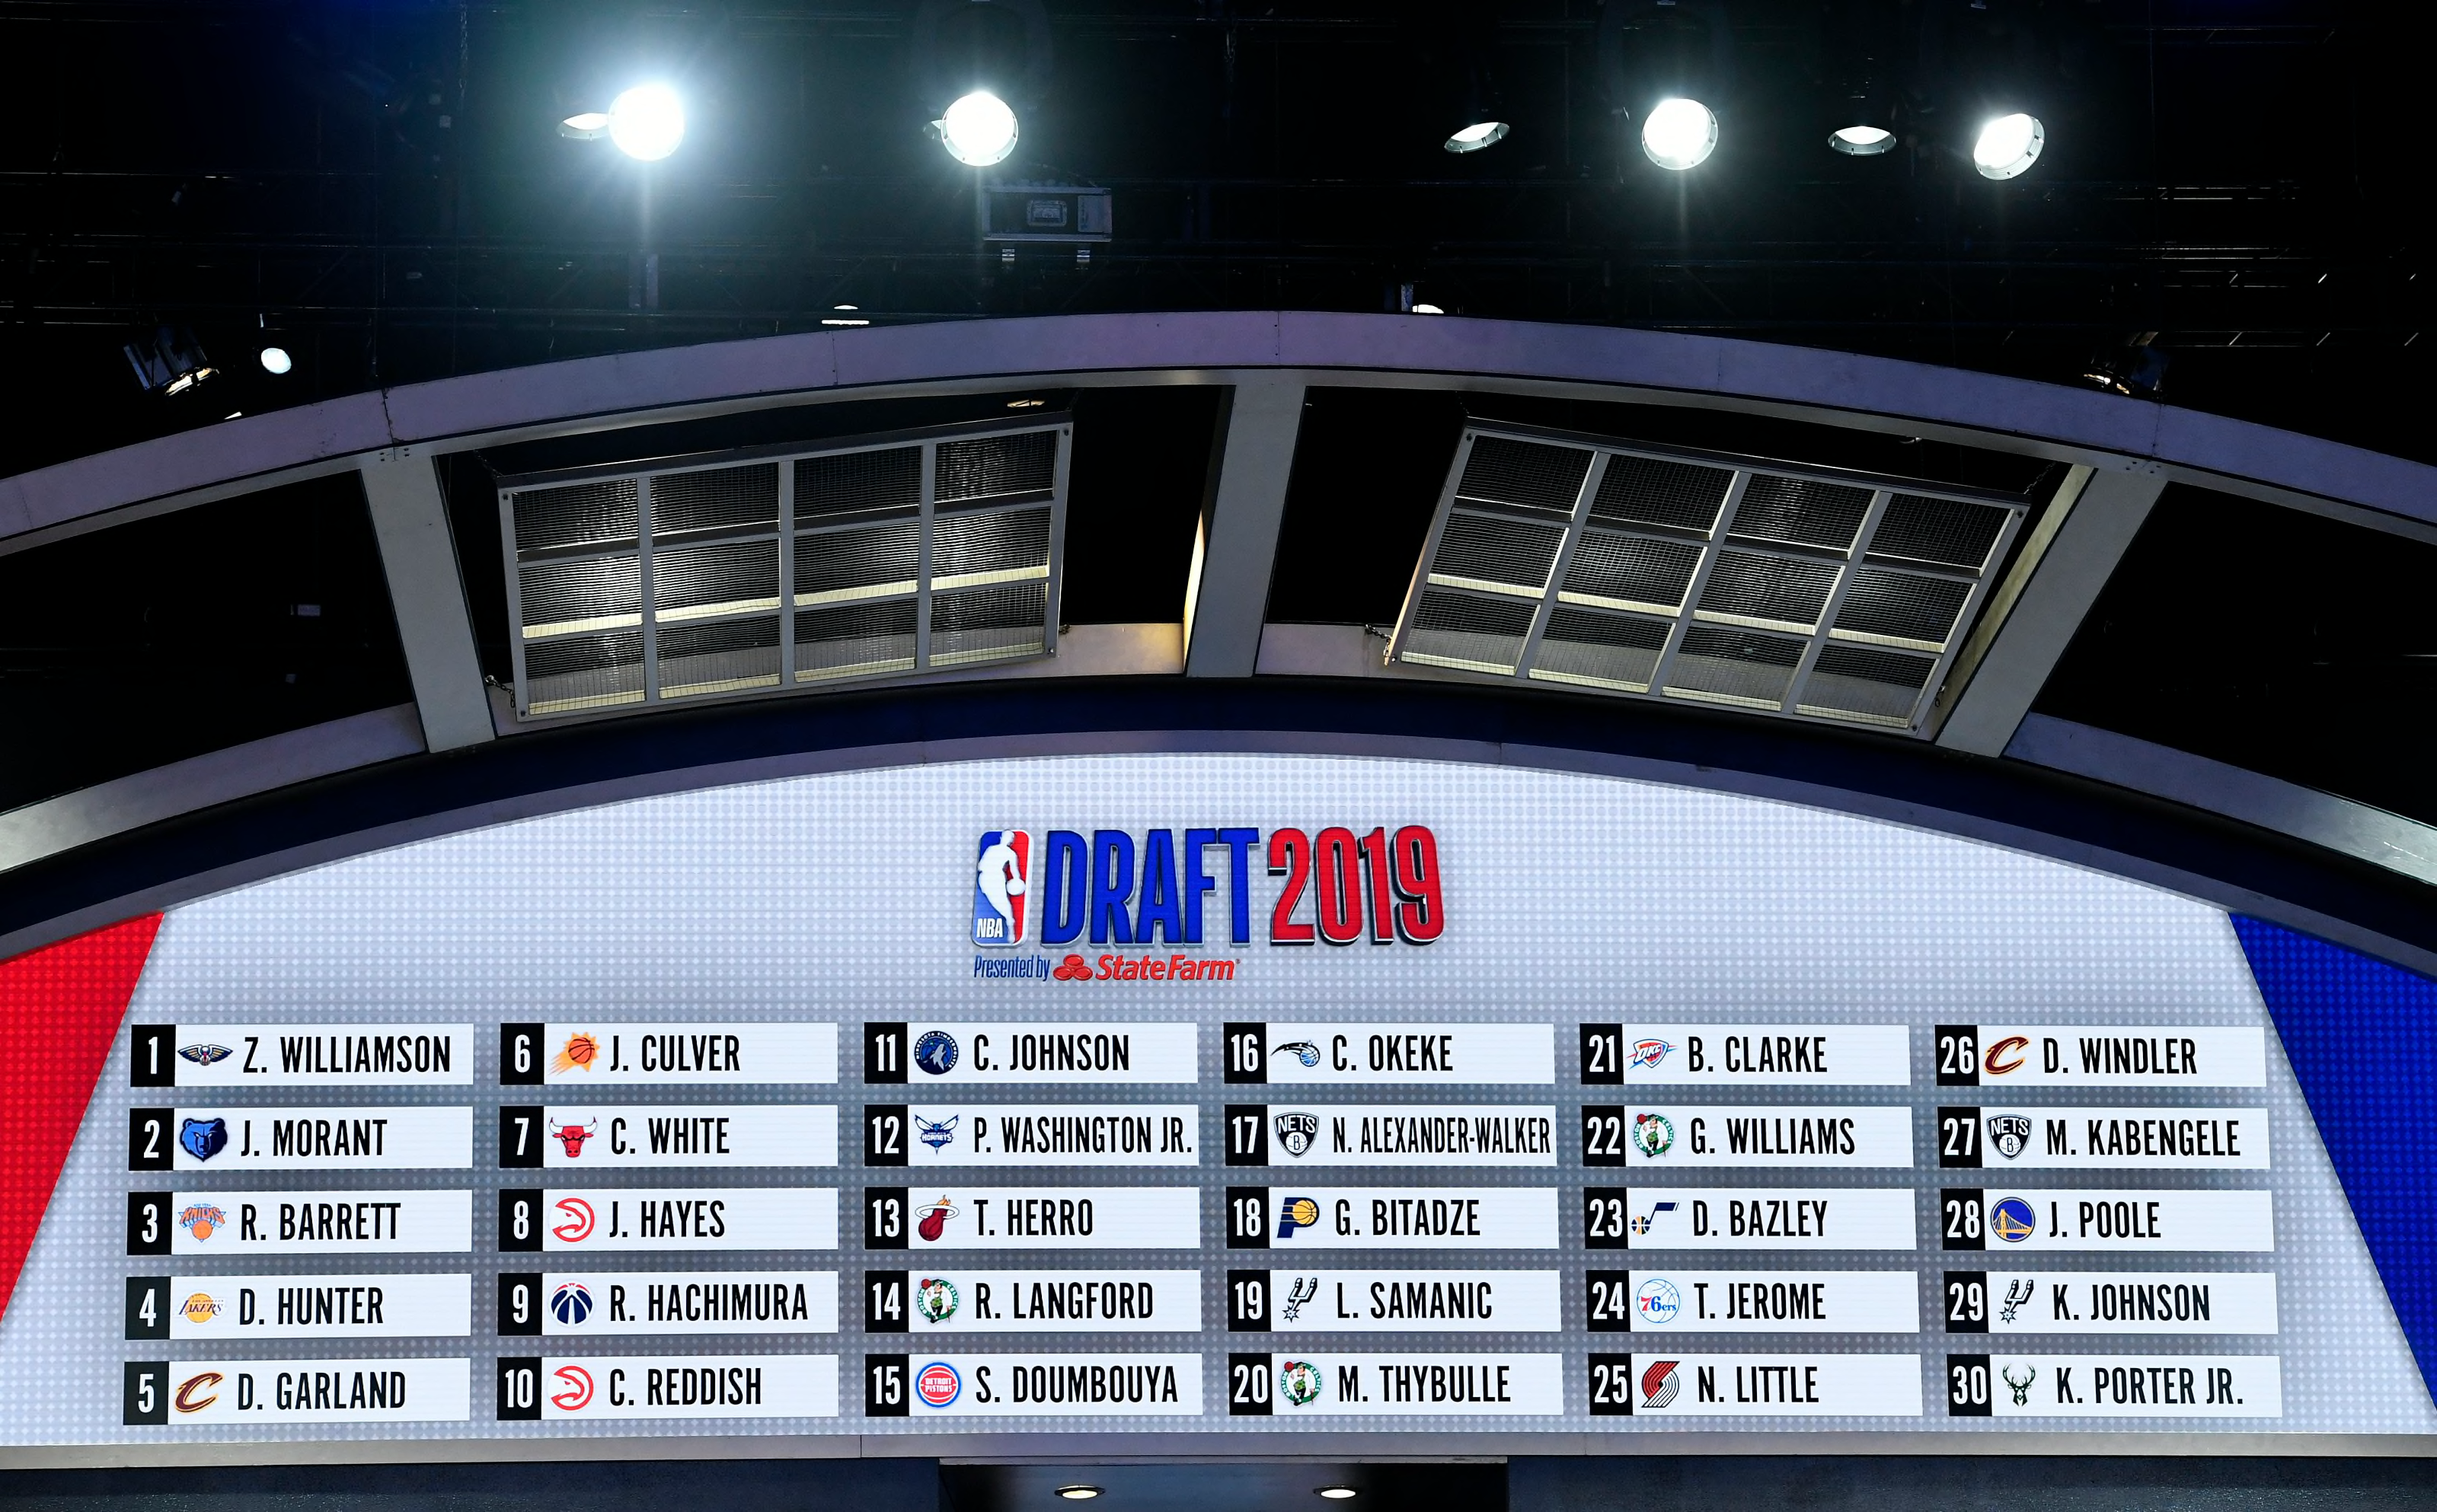 The top 10 college players entering the 2020 NBA Draft